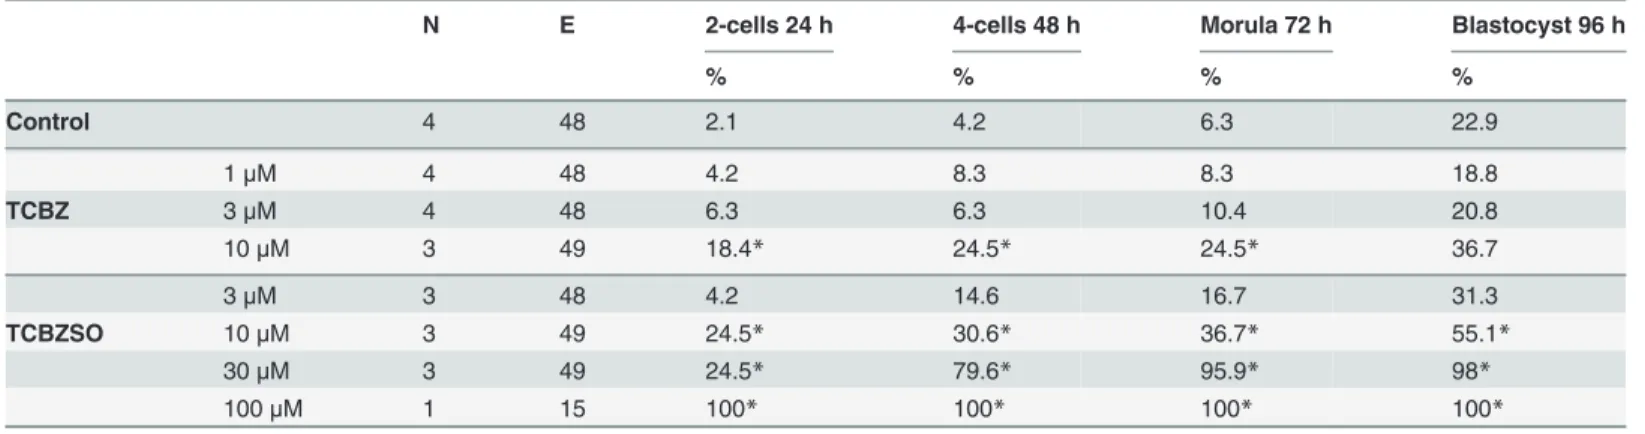 Table 3. Effects of TCBZ and TCBZSO in the rodent preimplantation whole embryo culture.